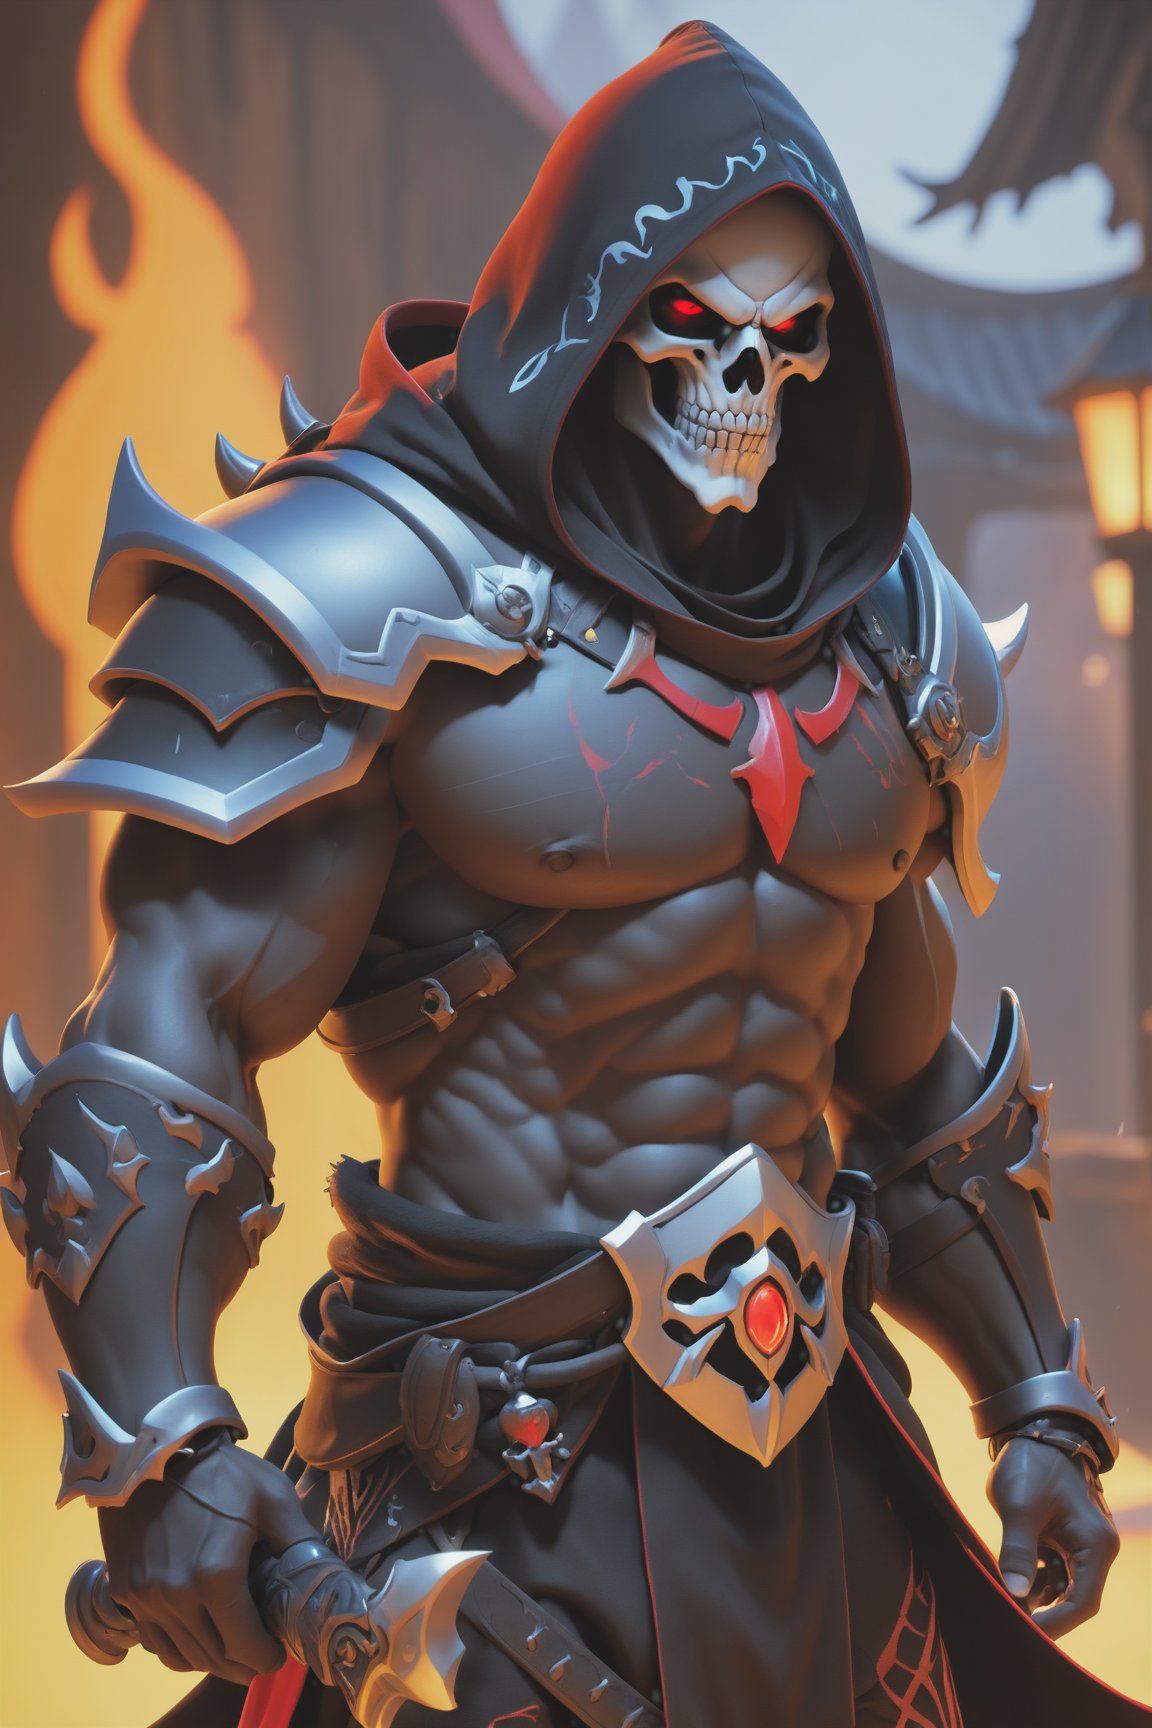 (best quality), (4K, HDR), ((Overwatch)), barbarian Reaper, musuclar man, hooded, strong body, glowing red eyes, (Death shot), fantasy style armor and clothing, fantasy, vibrant colors, dark fantasy, dark